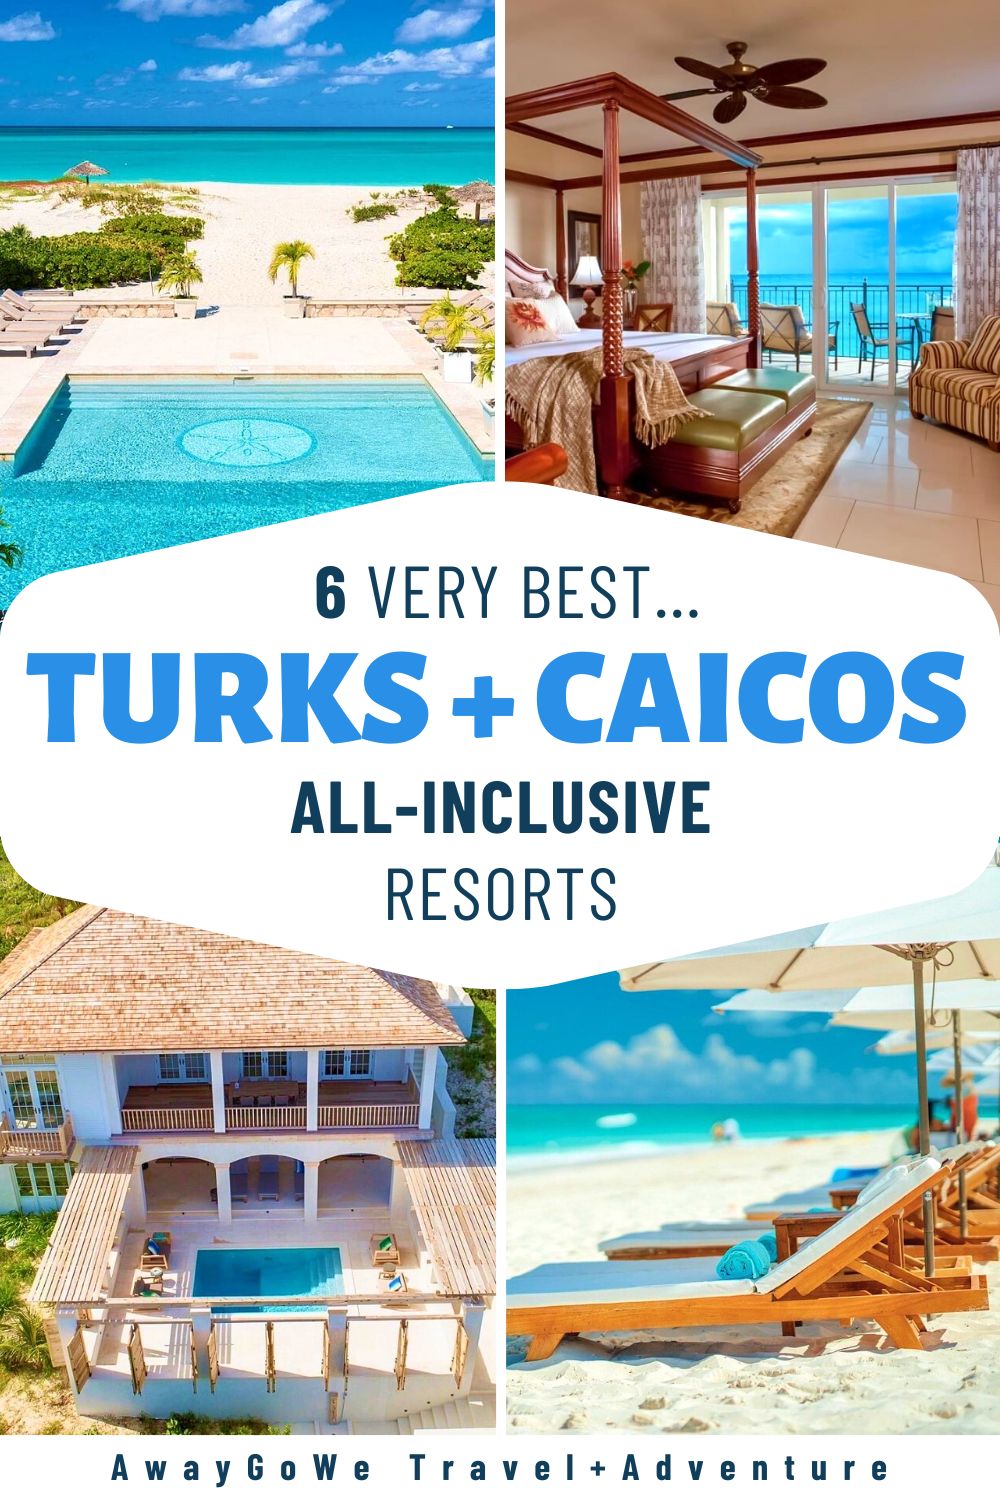 Turks and Caicos all-inclusive resorts